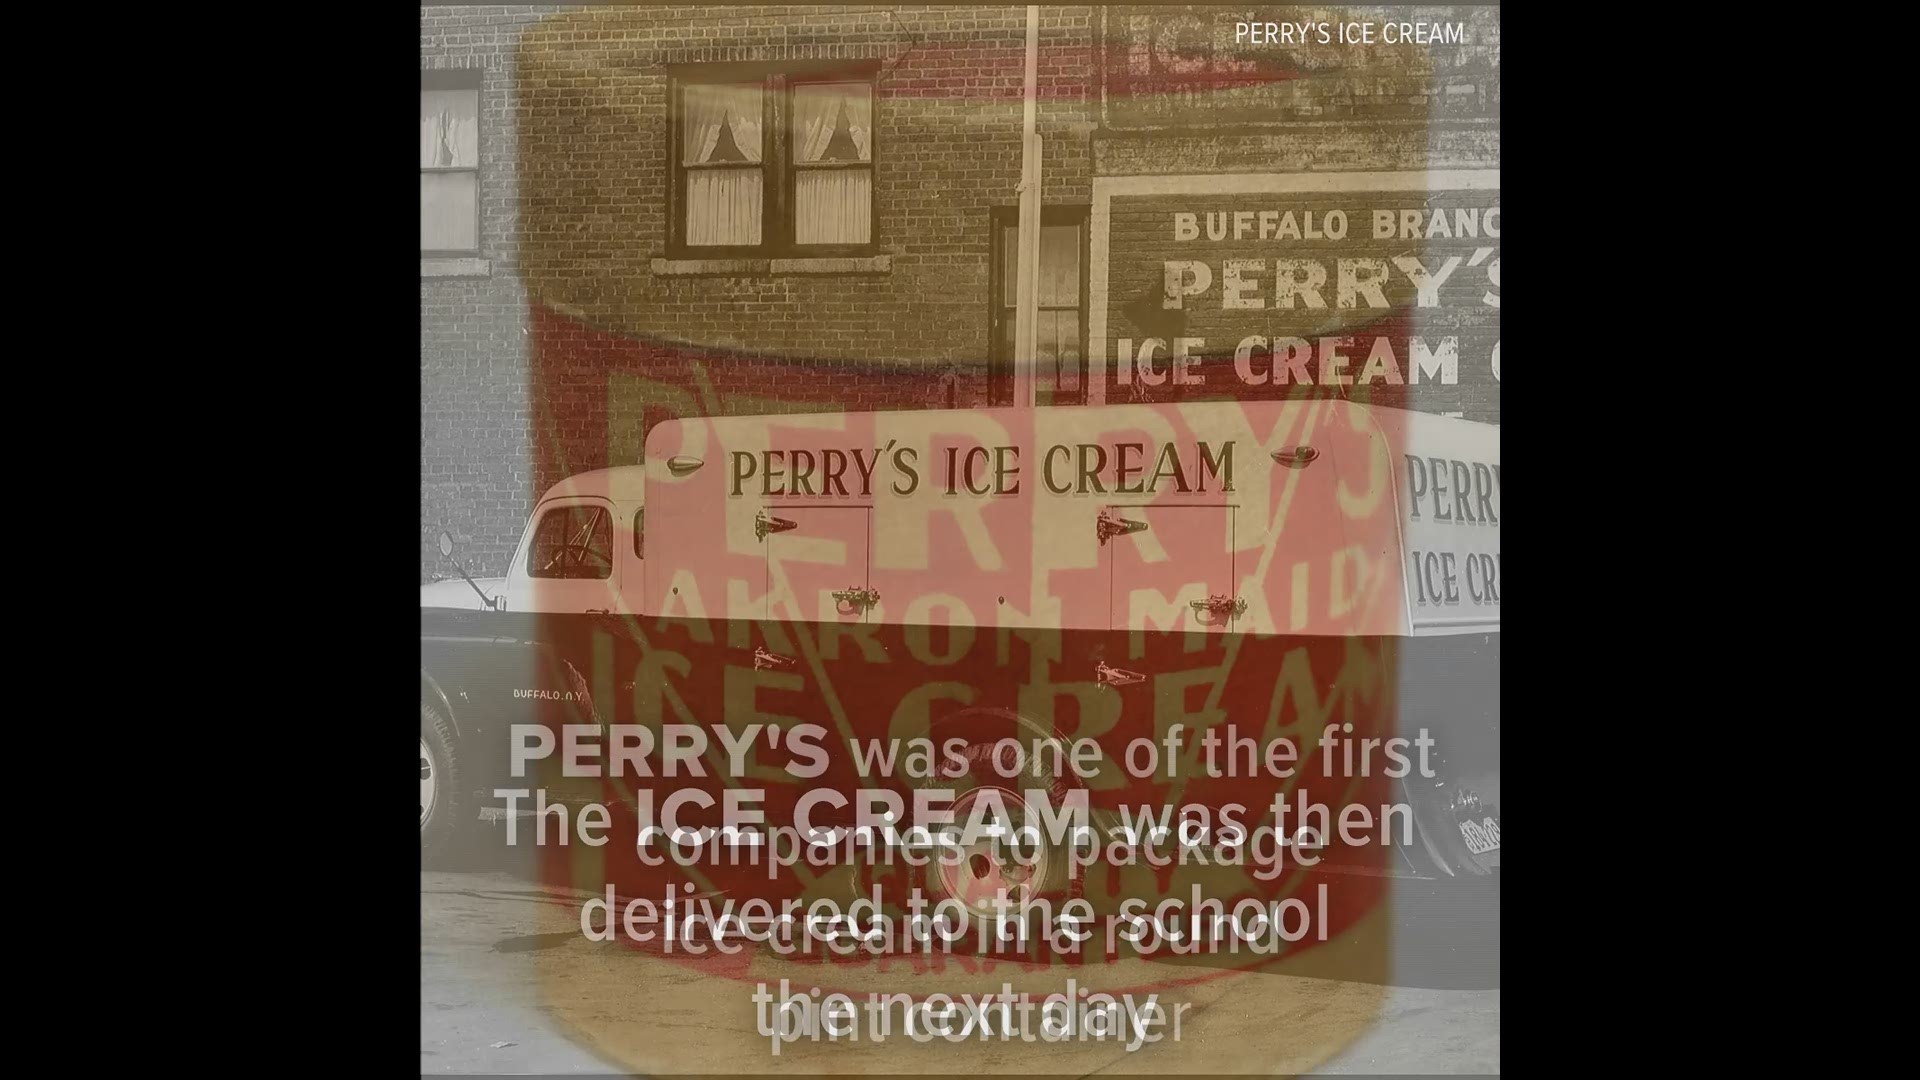 Perry's Ice Cream is celebrating their 100th Anniversary